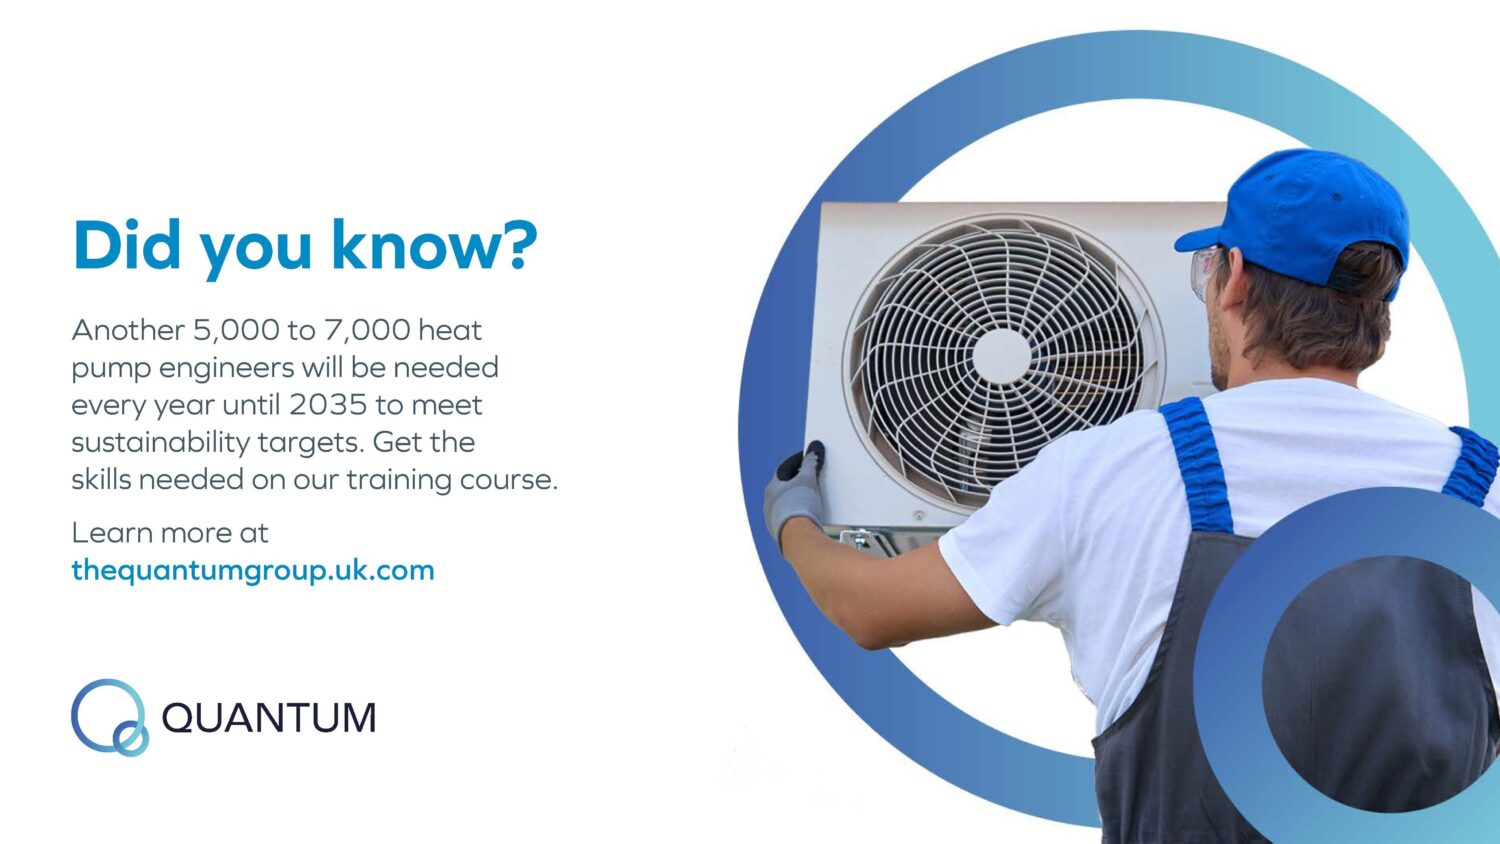 A heat pump installer fits a wall mounted unit out side a property, surrounded by the Quantum Q identity. Next to this the words 'Did you know? Another 5,000 to 7,000 heat pump engineers will be needed every year until 2035 to meet sustainability targets. Get the skills needed on our training course'